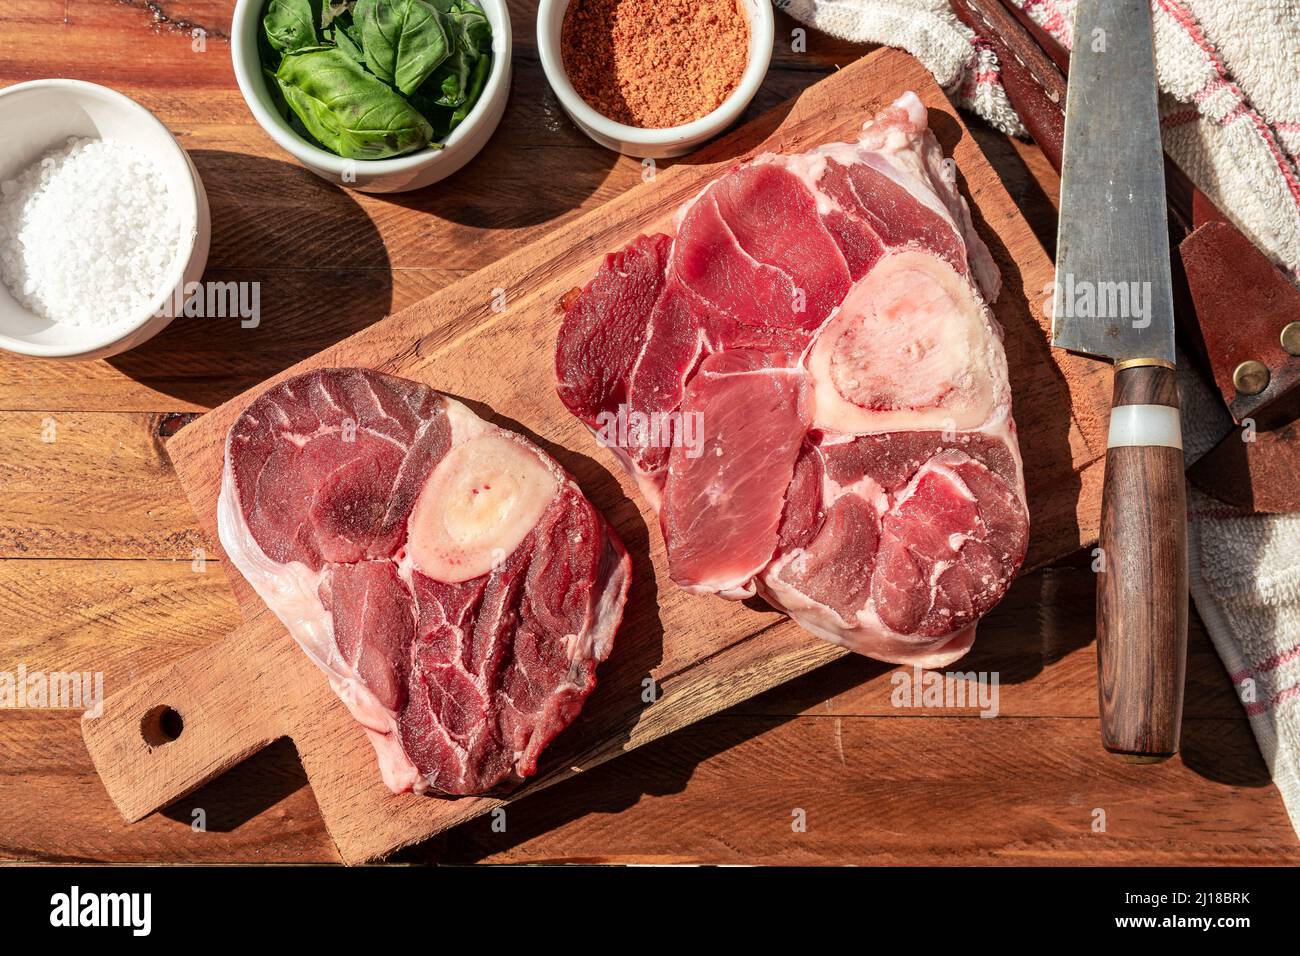 https://c8.alamy.com/comp/2J18BRK/two-steaks-of-raw-beef-ossobuco-on-a-wooden-board-with-seasoning-to-flavour-the-pieces-of-meat-animal-protein-concept-cheap-cuts-of-beef-aereal-vie-2J18BRK.jpg